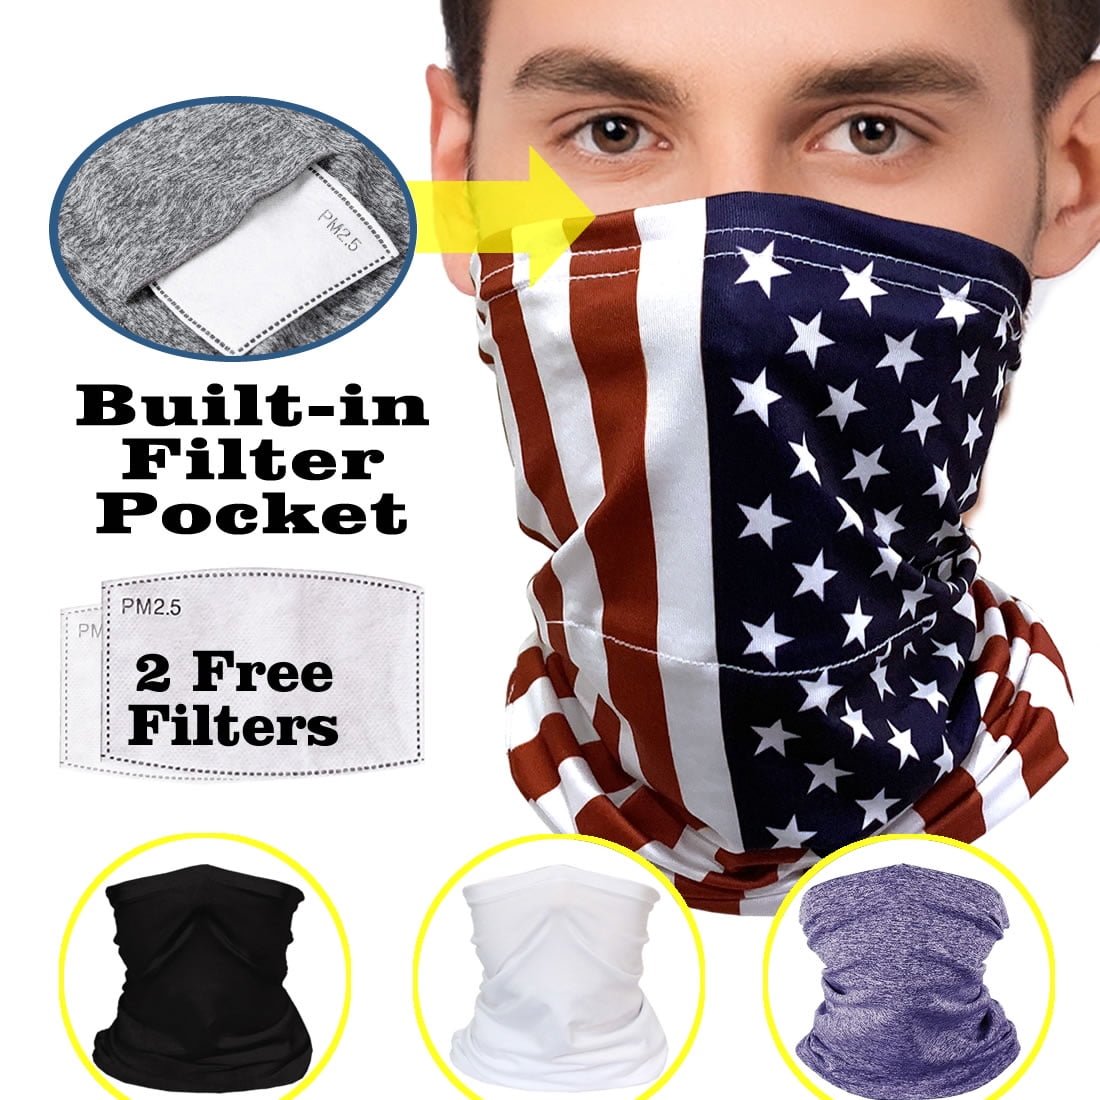 Cleanbreath Reusable Neck Gaiter with Filter Insert Fashionable Cooling Face Covering Bandanas for Men/Women 